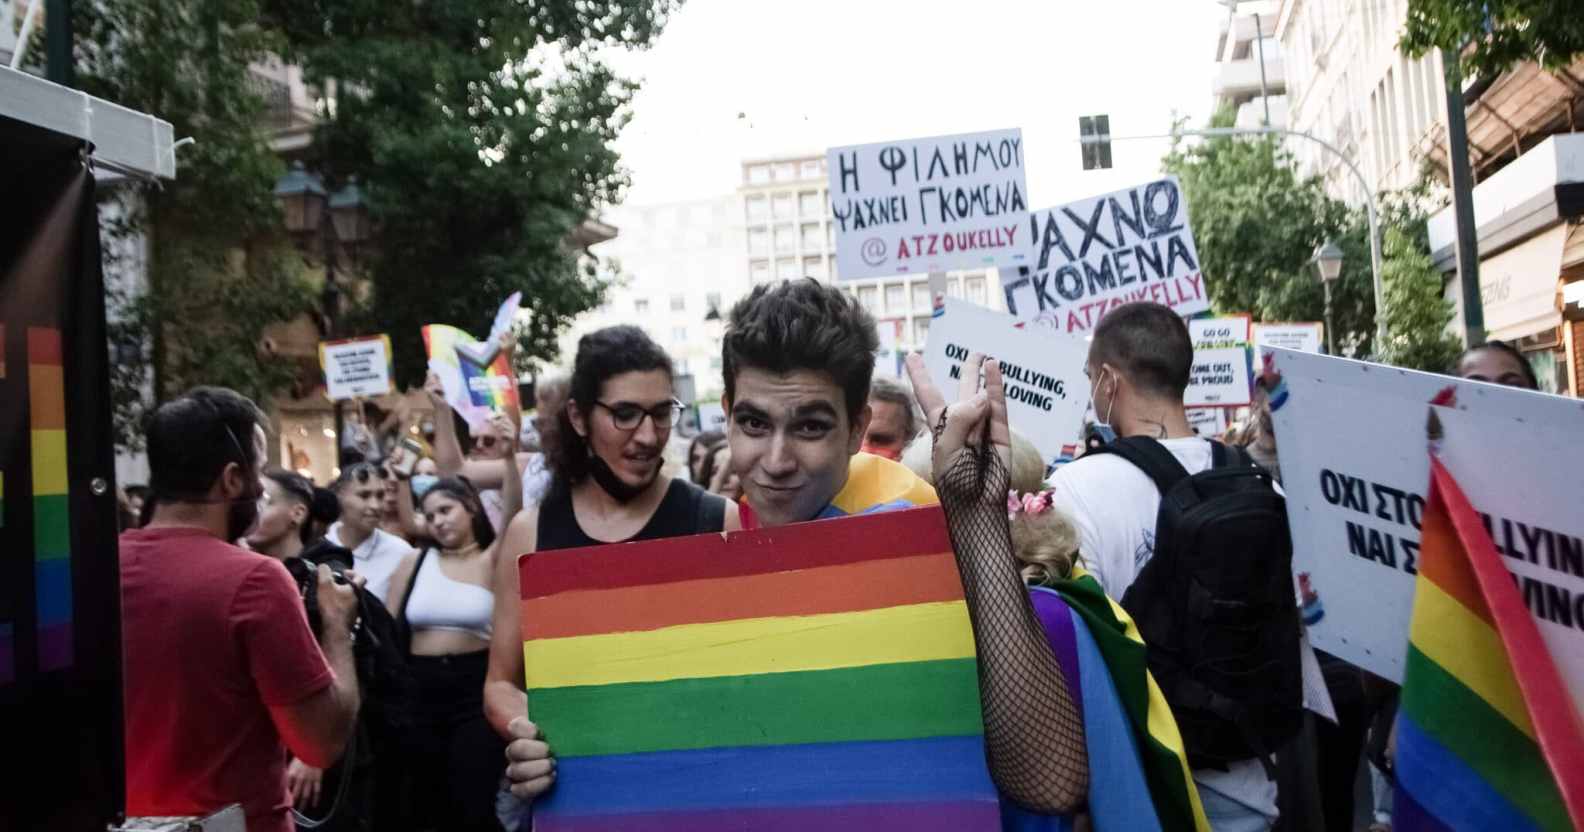 Thousands of people march in the streets of city center during the annual Gay Pride parade organized by LGBT activists in Athens